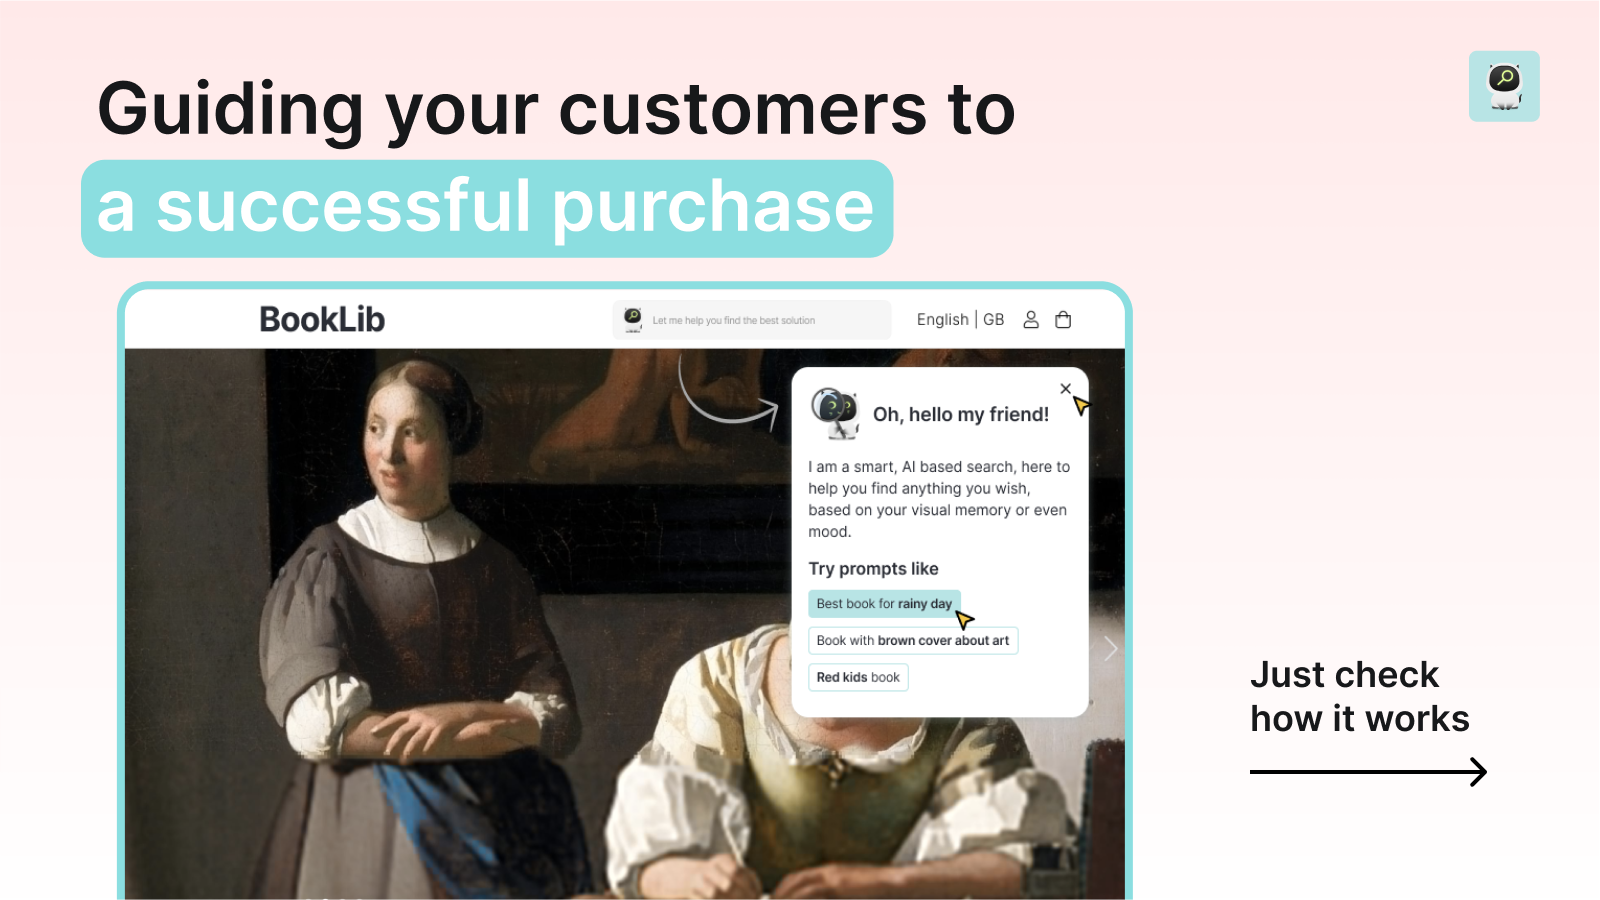 Guiding your customers to a successful purchase